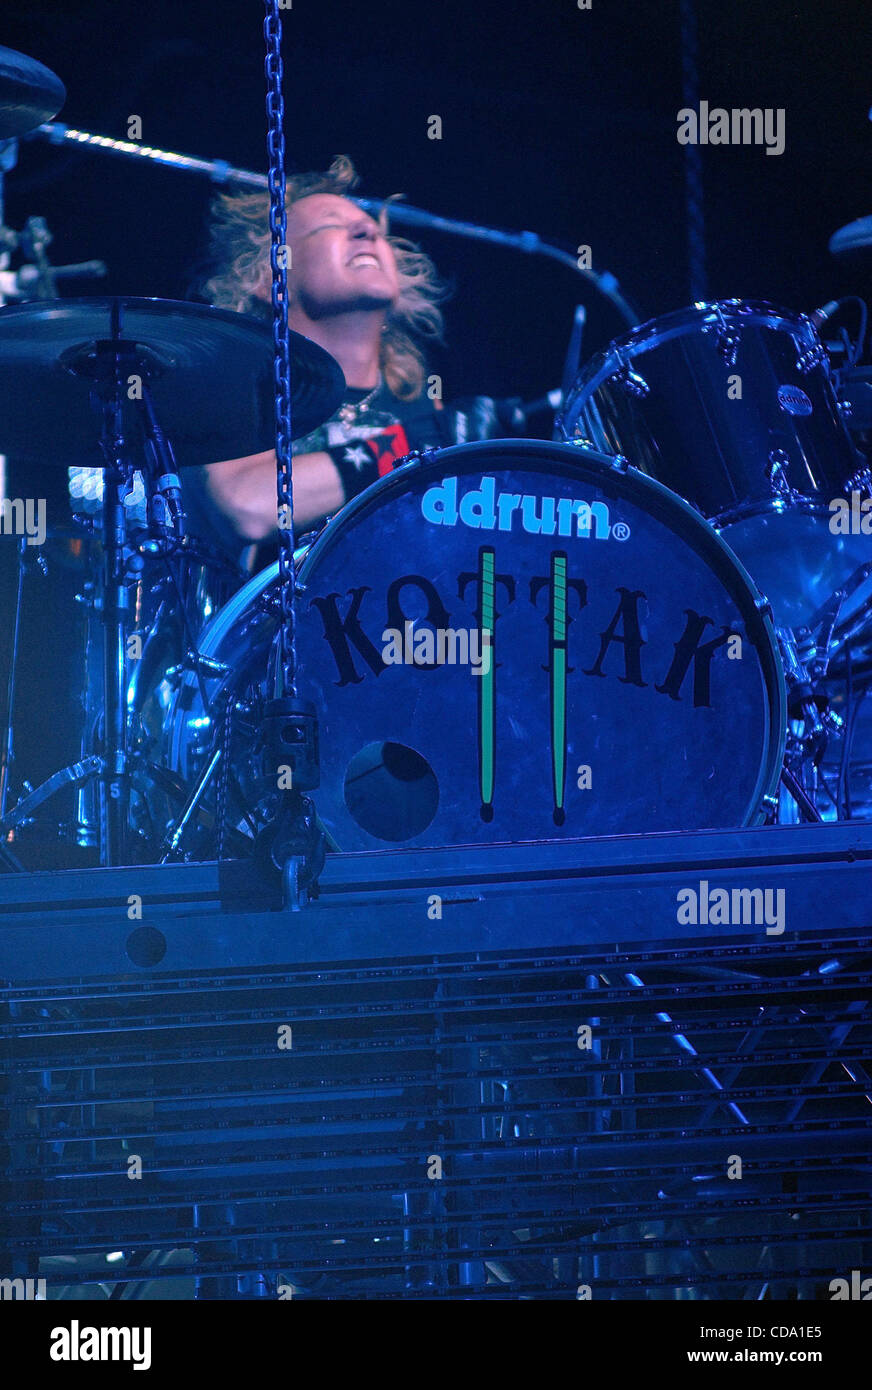 Jul 31, 2010 - Los Angeles, California, U.S. - JAMES KOTTAK, drummer for SCORPIONS, performs to a sold-out show at Nokia Theater L.A. Live in support of their 17th and final album 'Sting in the tail'. (Credit Image: © Valerie Nerres/ZUMApress.com) Stock Photo